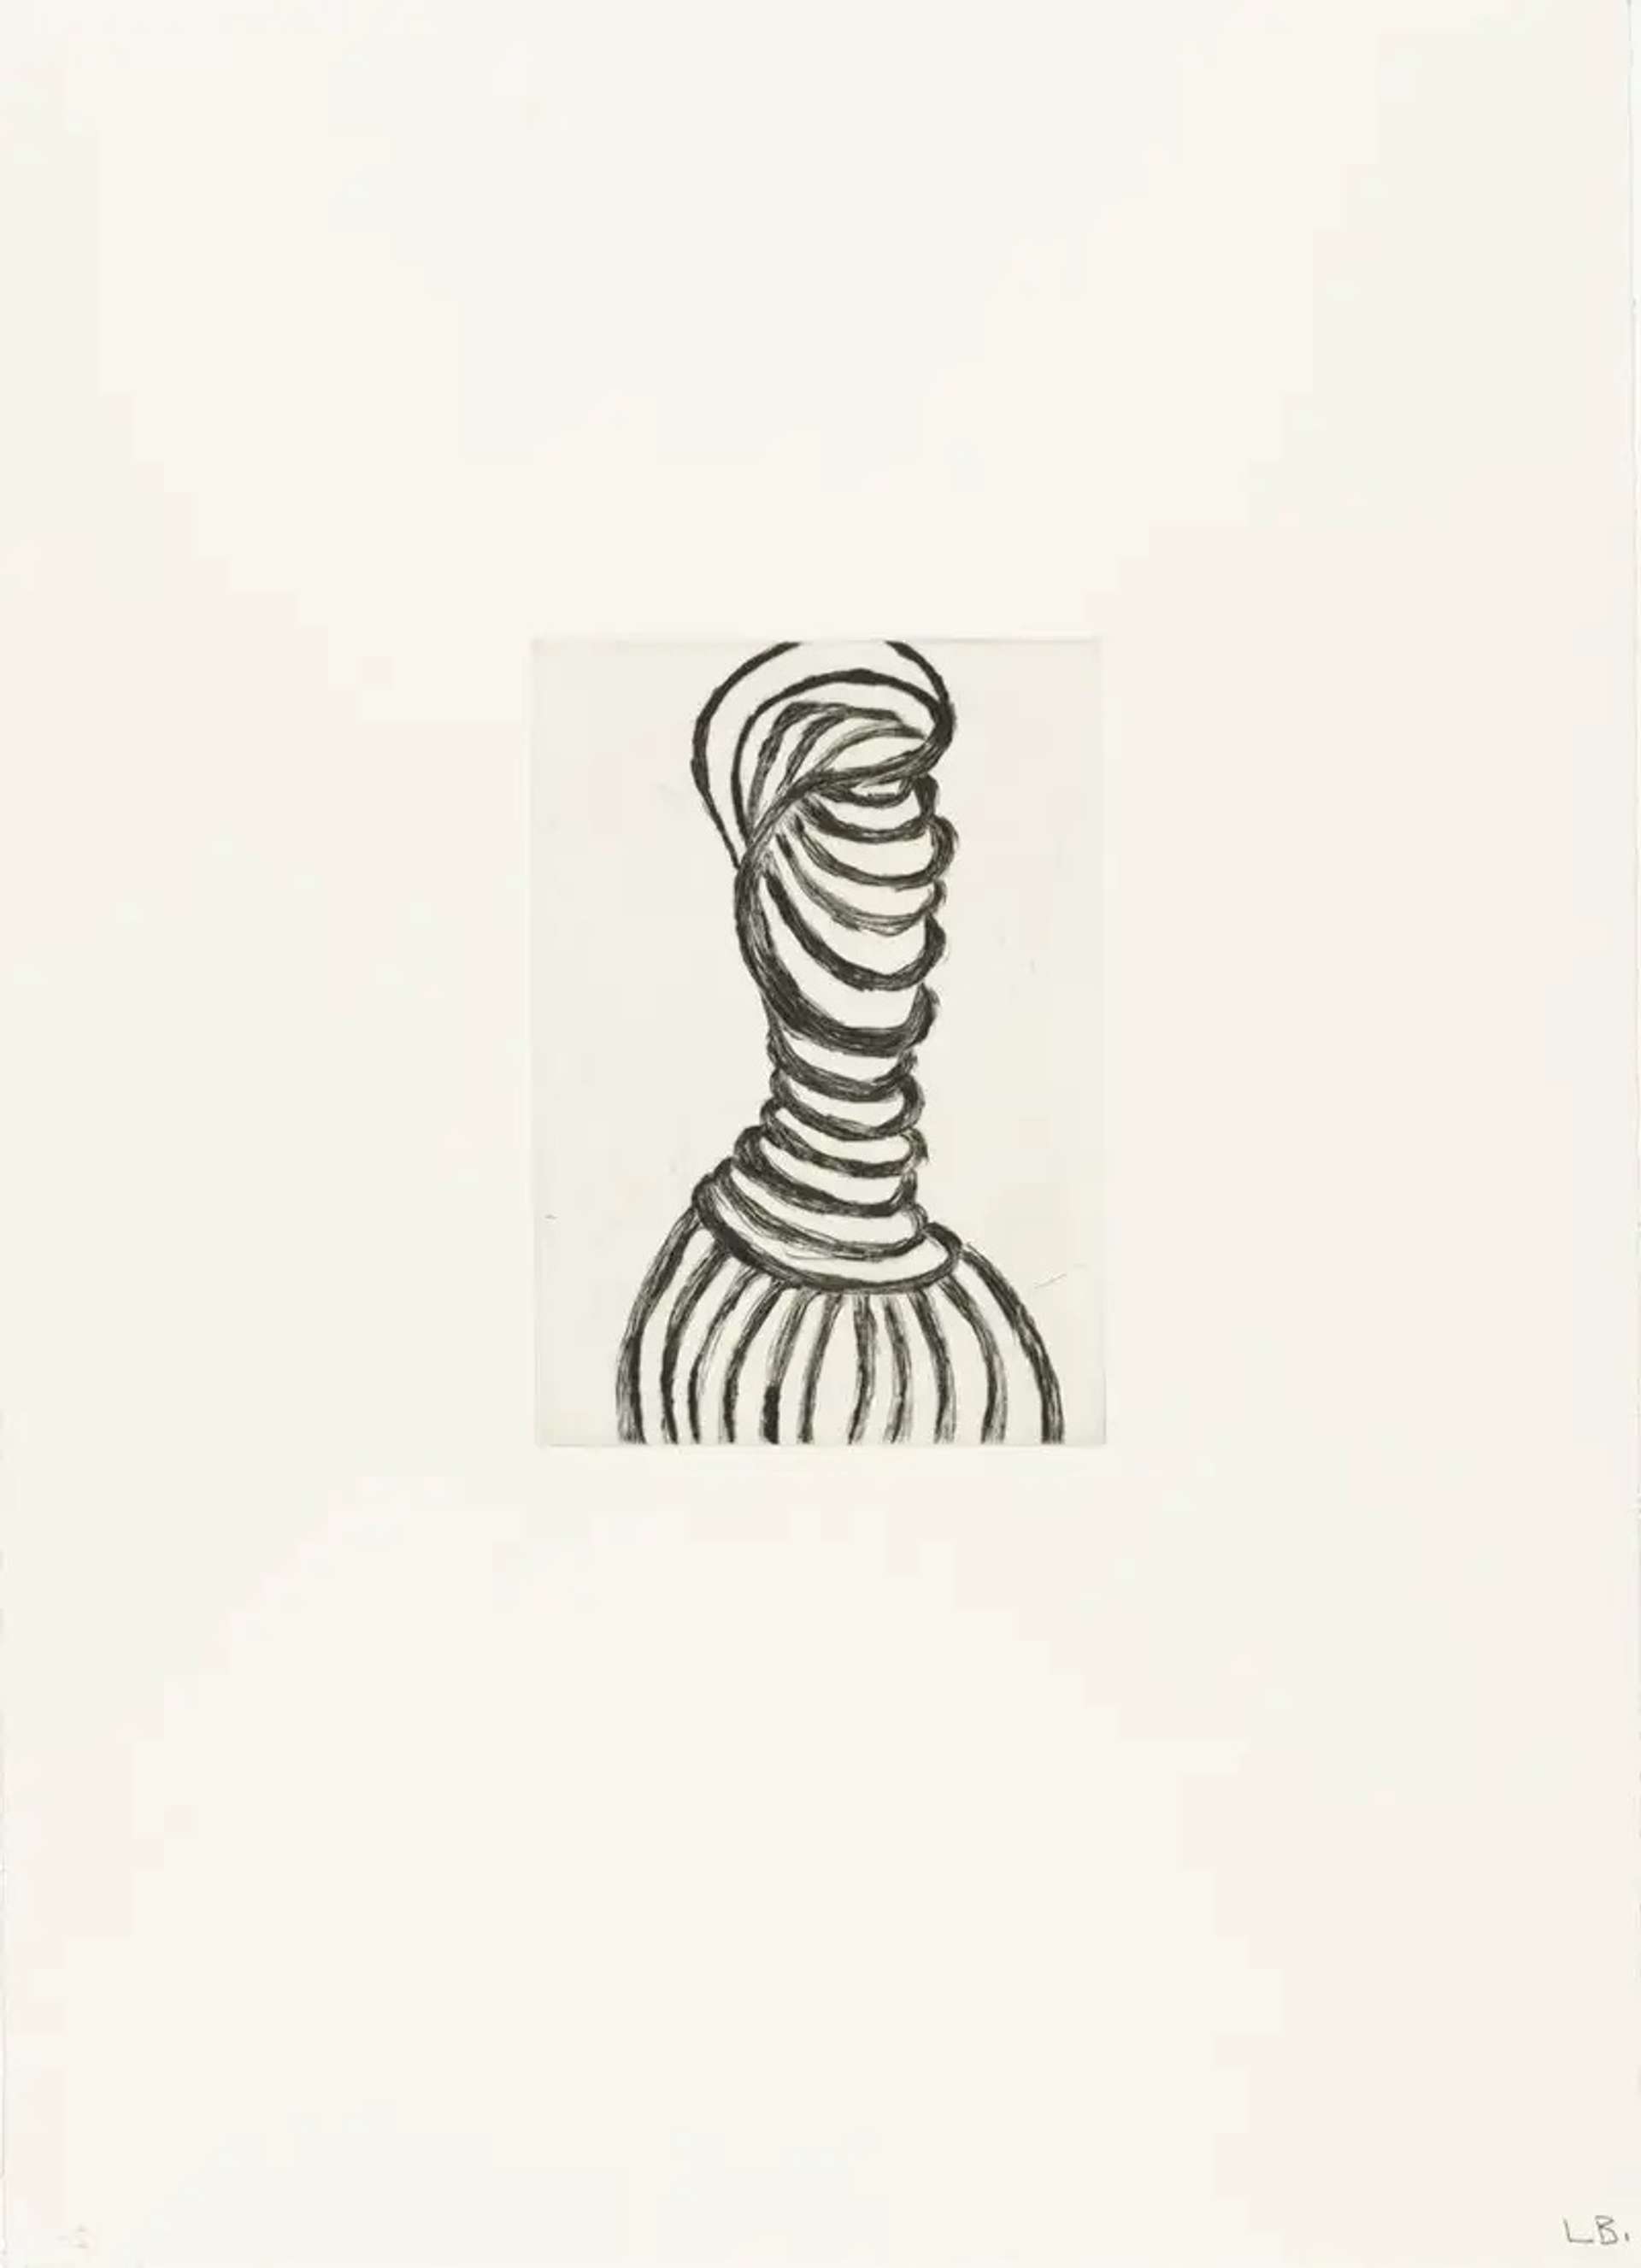 Louise Bourgeois Untitled No. 11. A monochromatic etching of an anatomical depiction of black swirls in a vertical pattern.